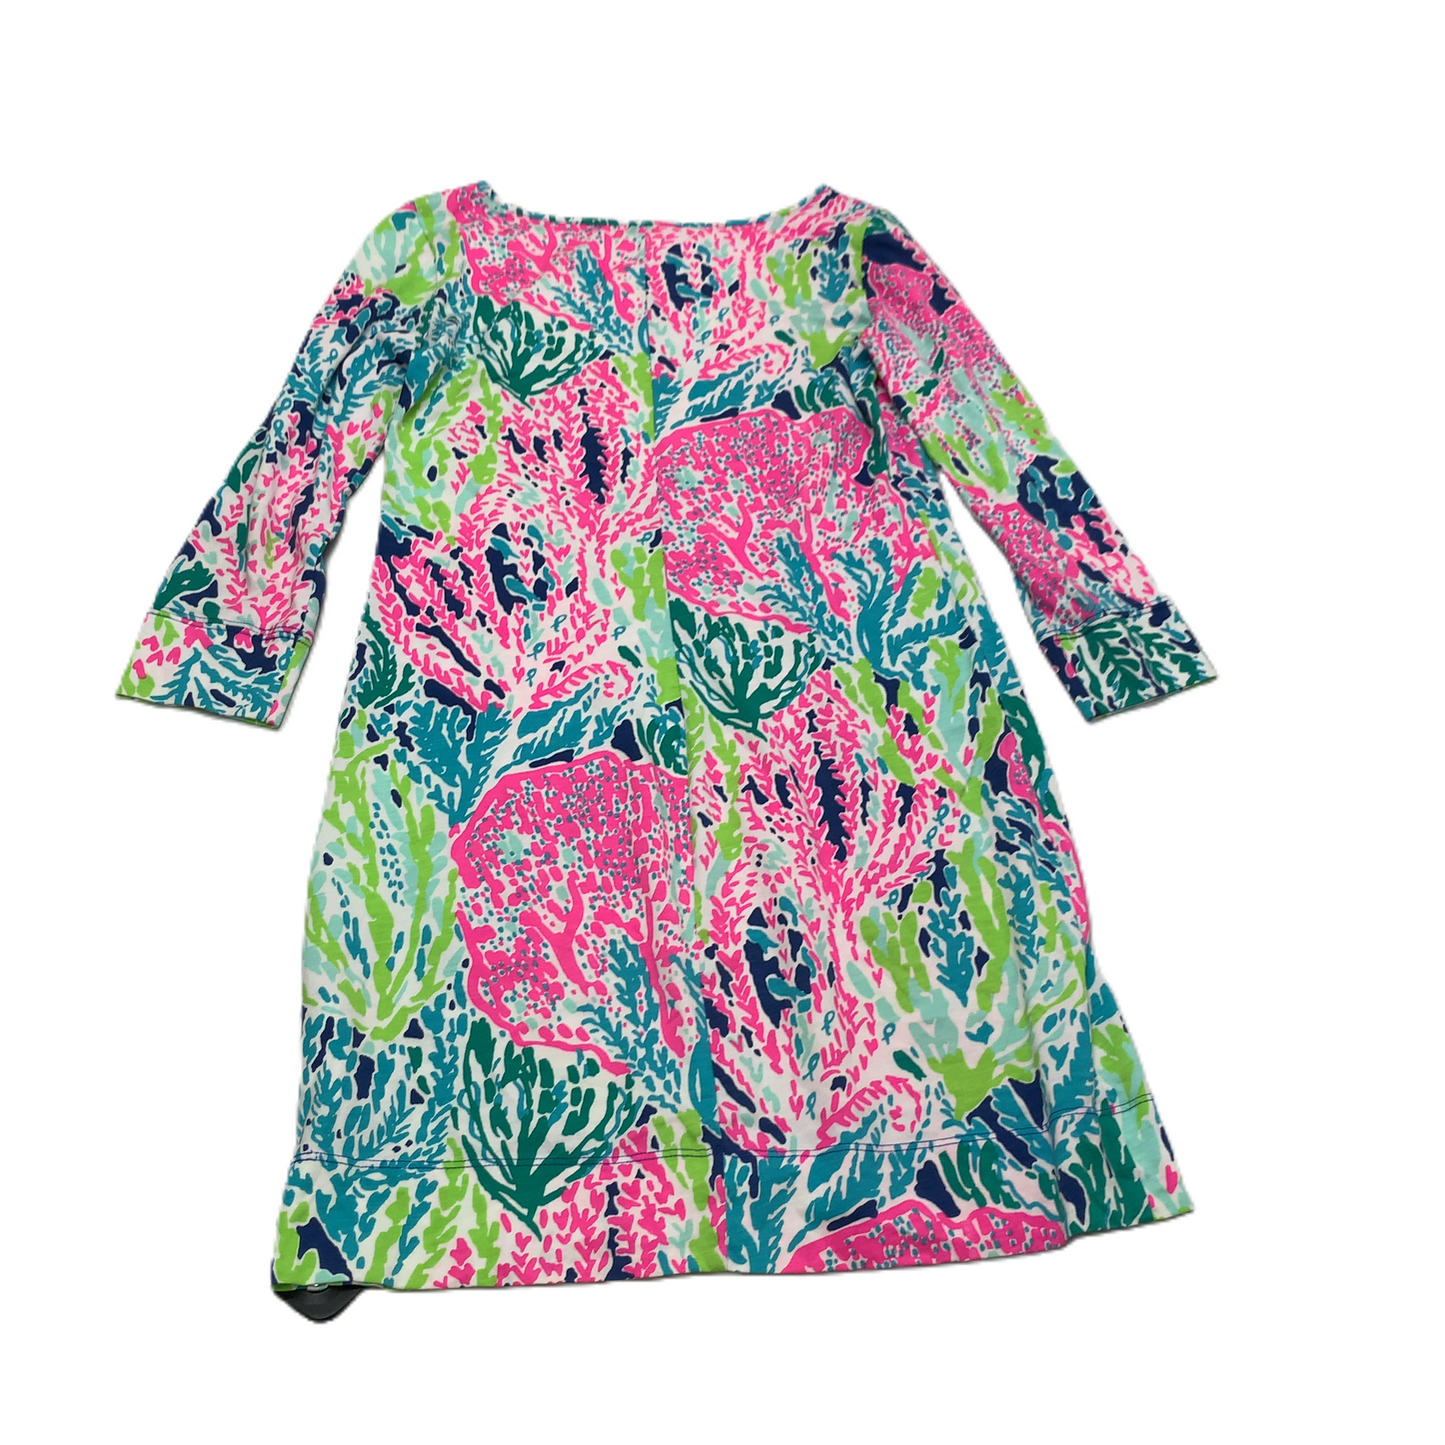 Blue & Green  Dress Designer By Lilly Pulitzer  Size: Xs